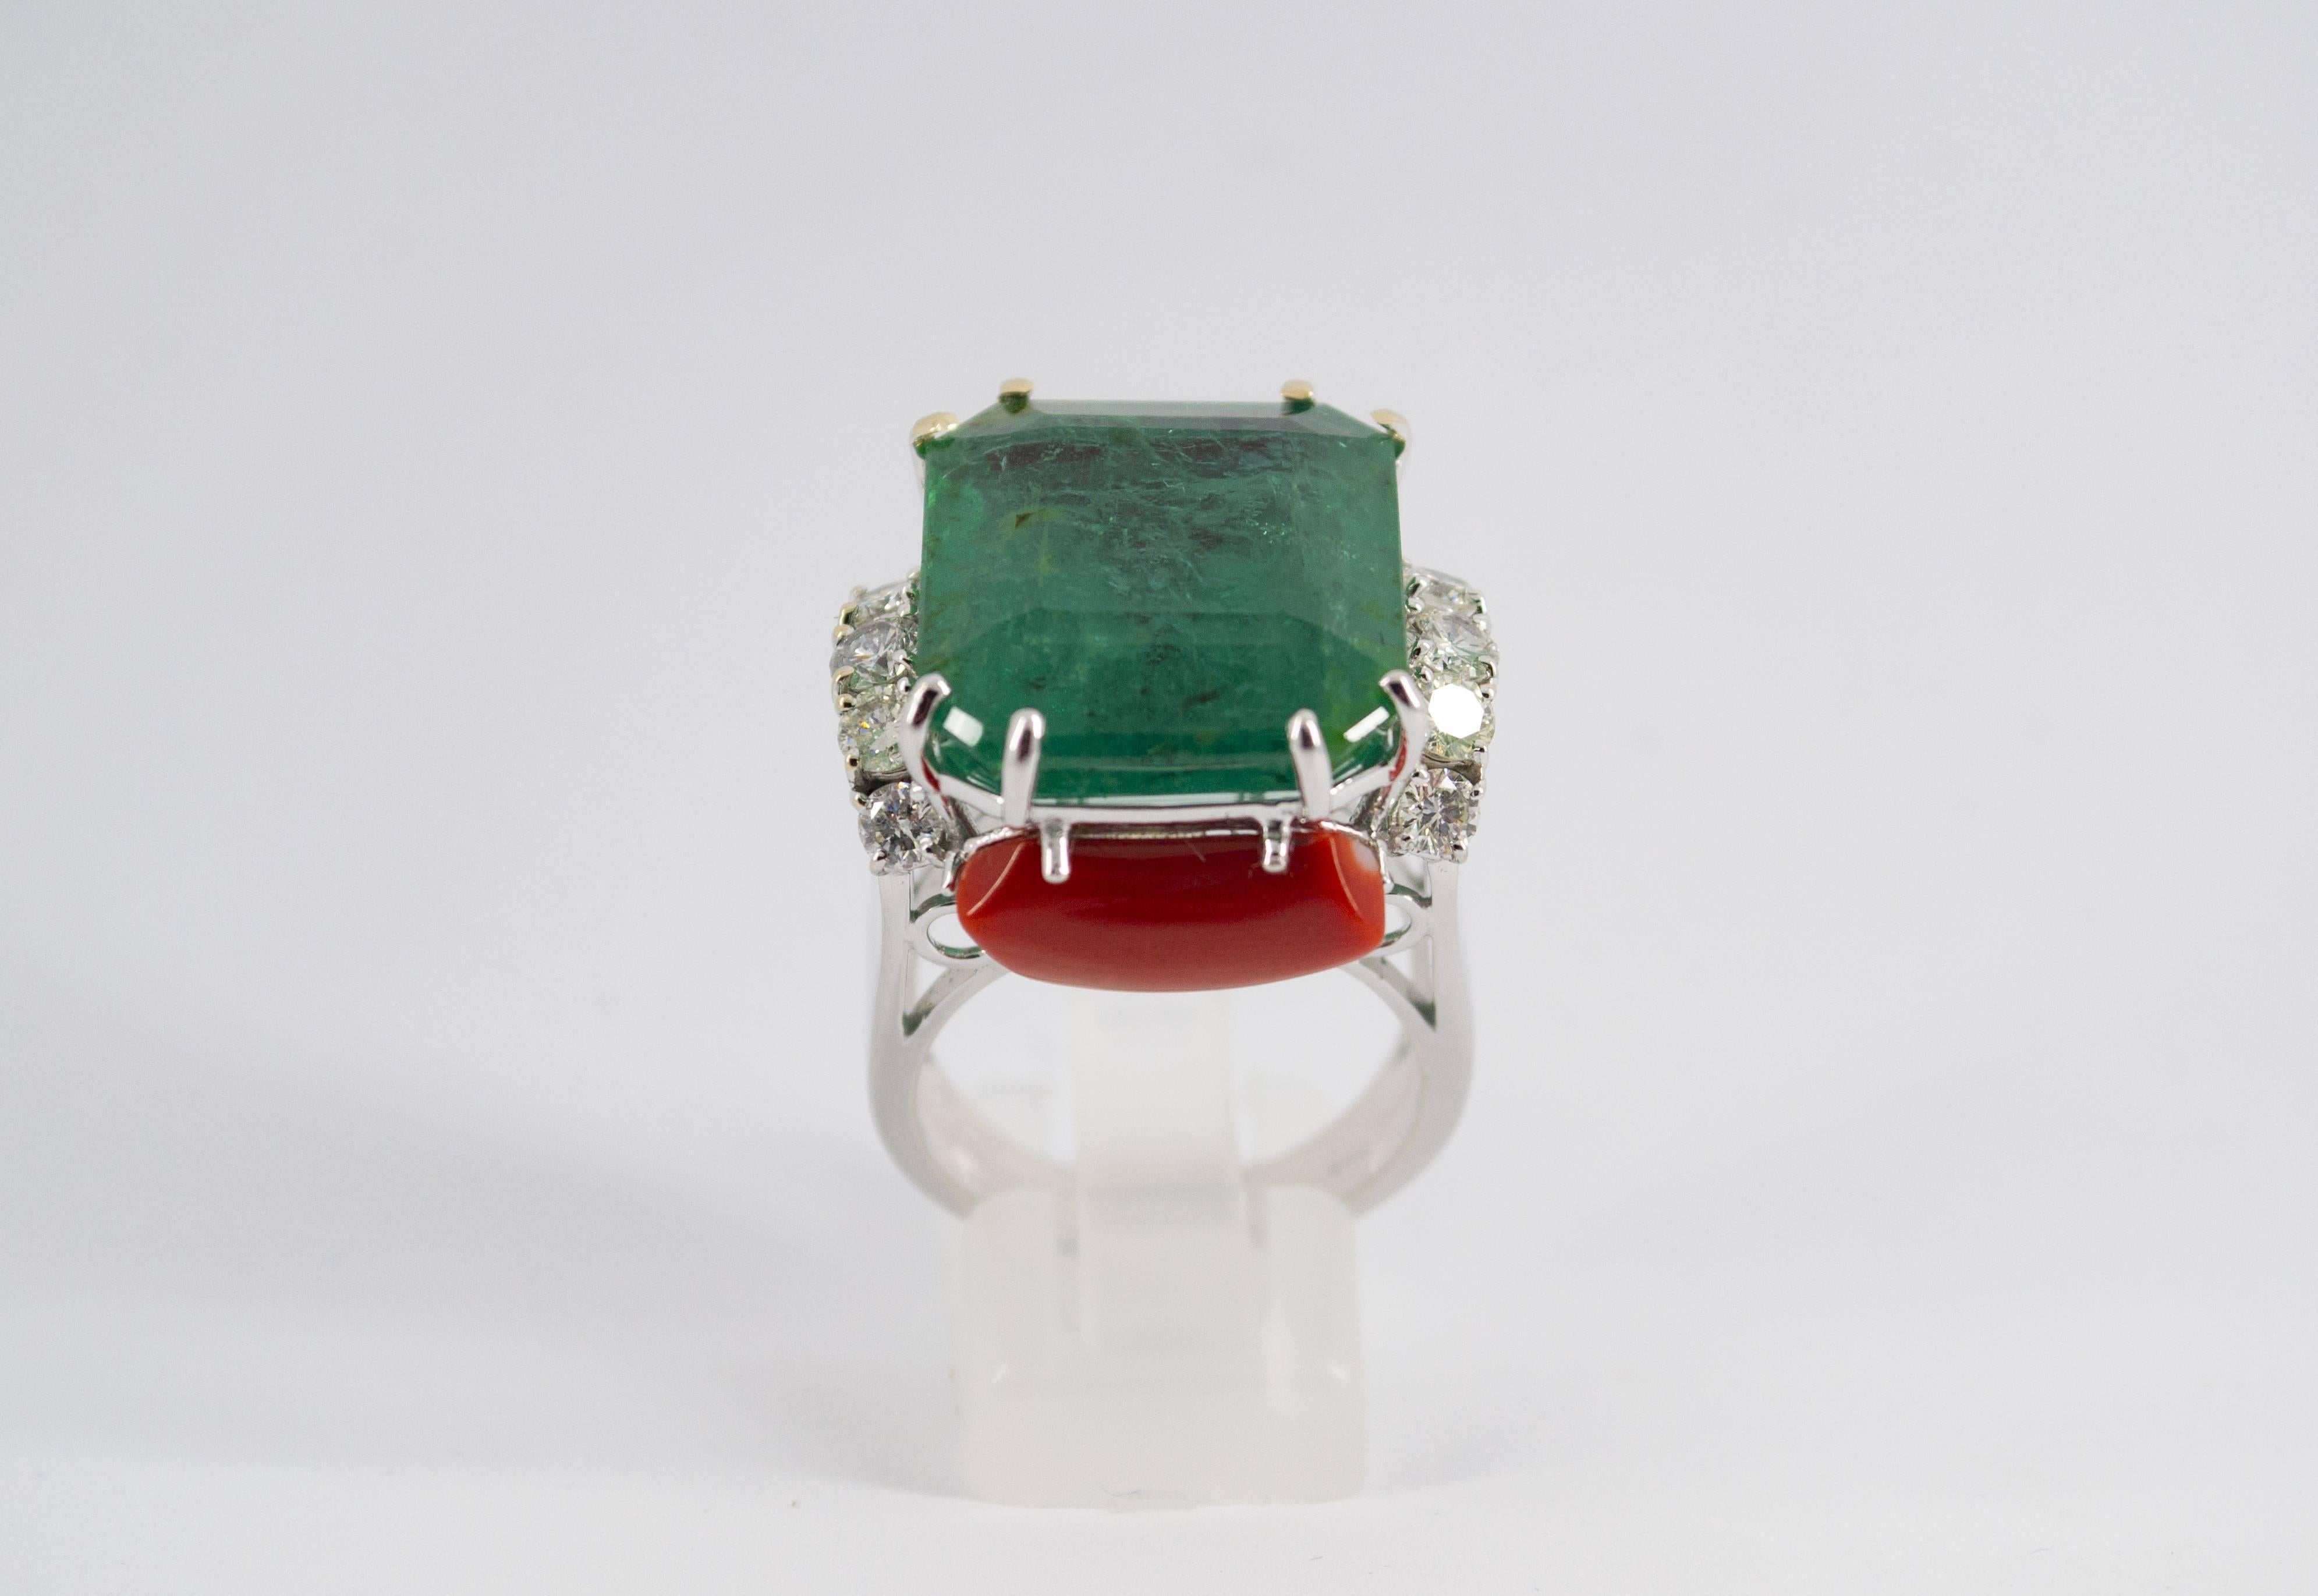 This Ring is made of 18K White Gold.
This Ring has 1.23 Carats of White Diamonds.
This Ring has a 23.70 Carats Emerald.
This Ring has Mediterranean (Sardinia, Italy) Red Coral.
Size ITA: 17 USA: 8
We're a workshop so every piece is handmade,